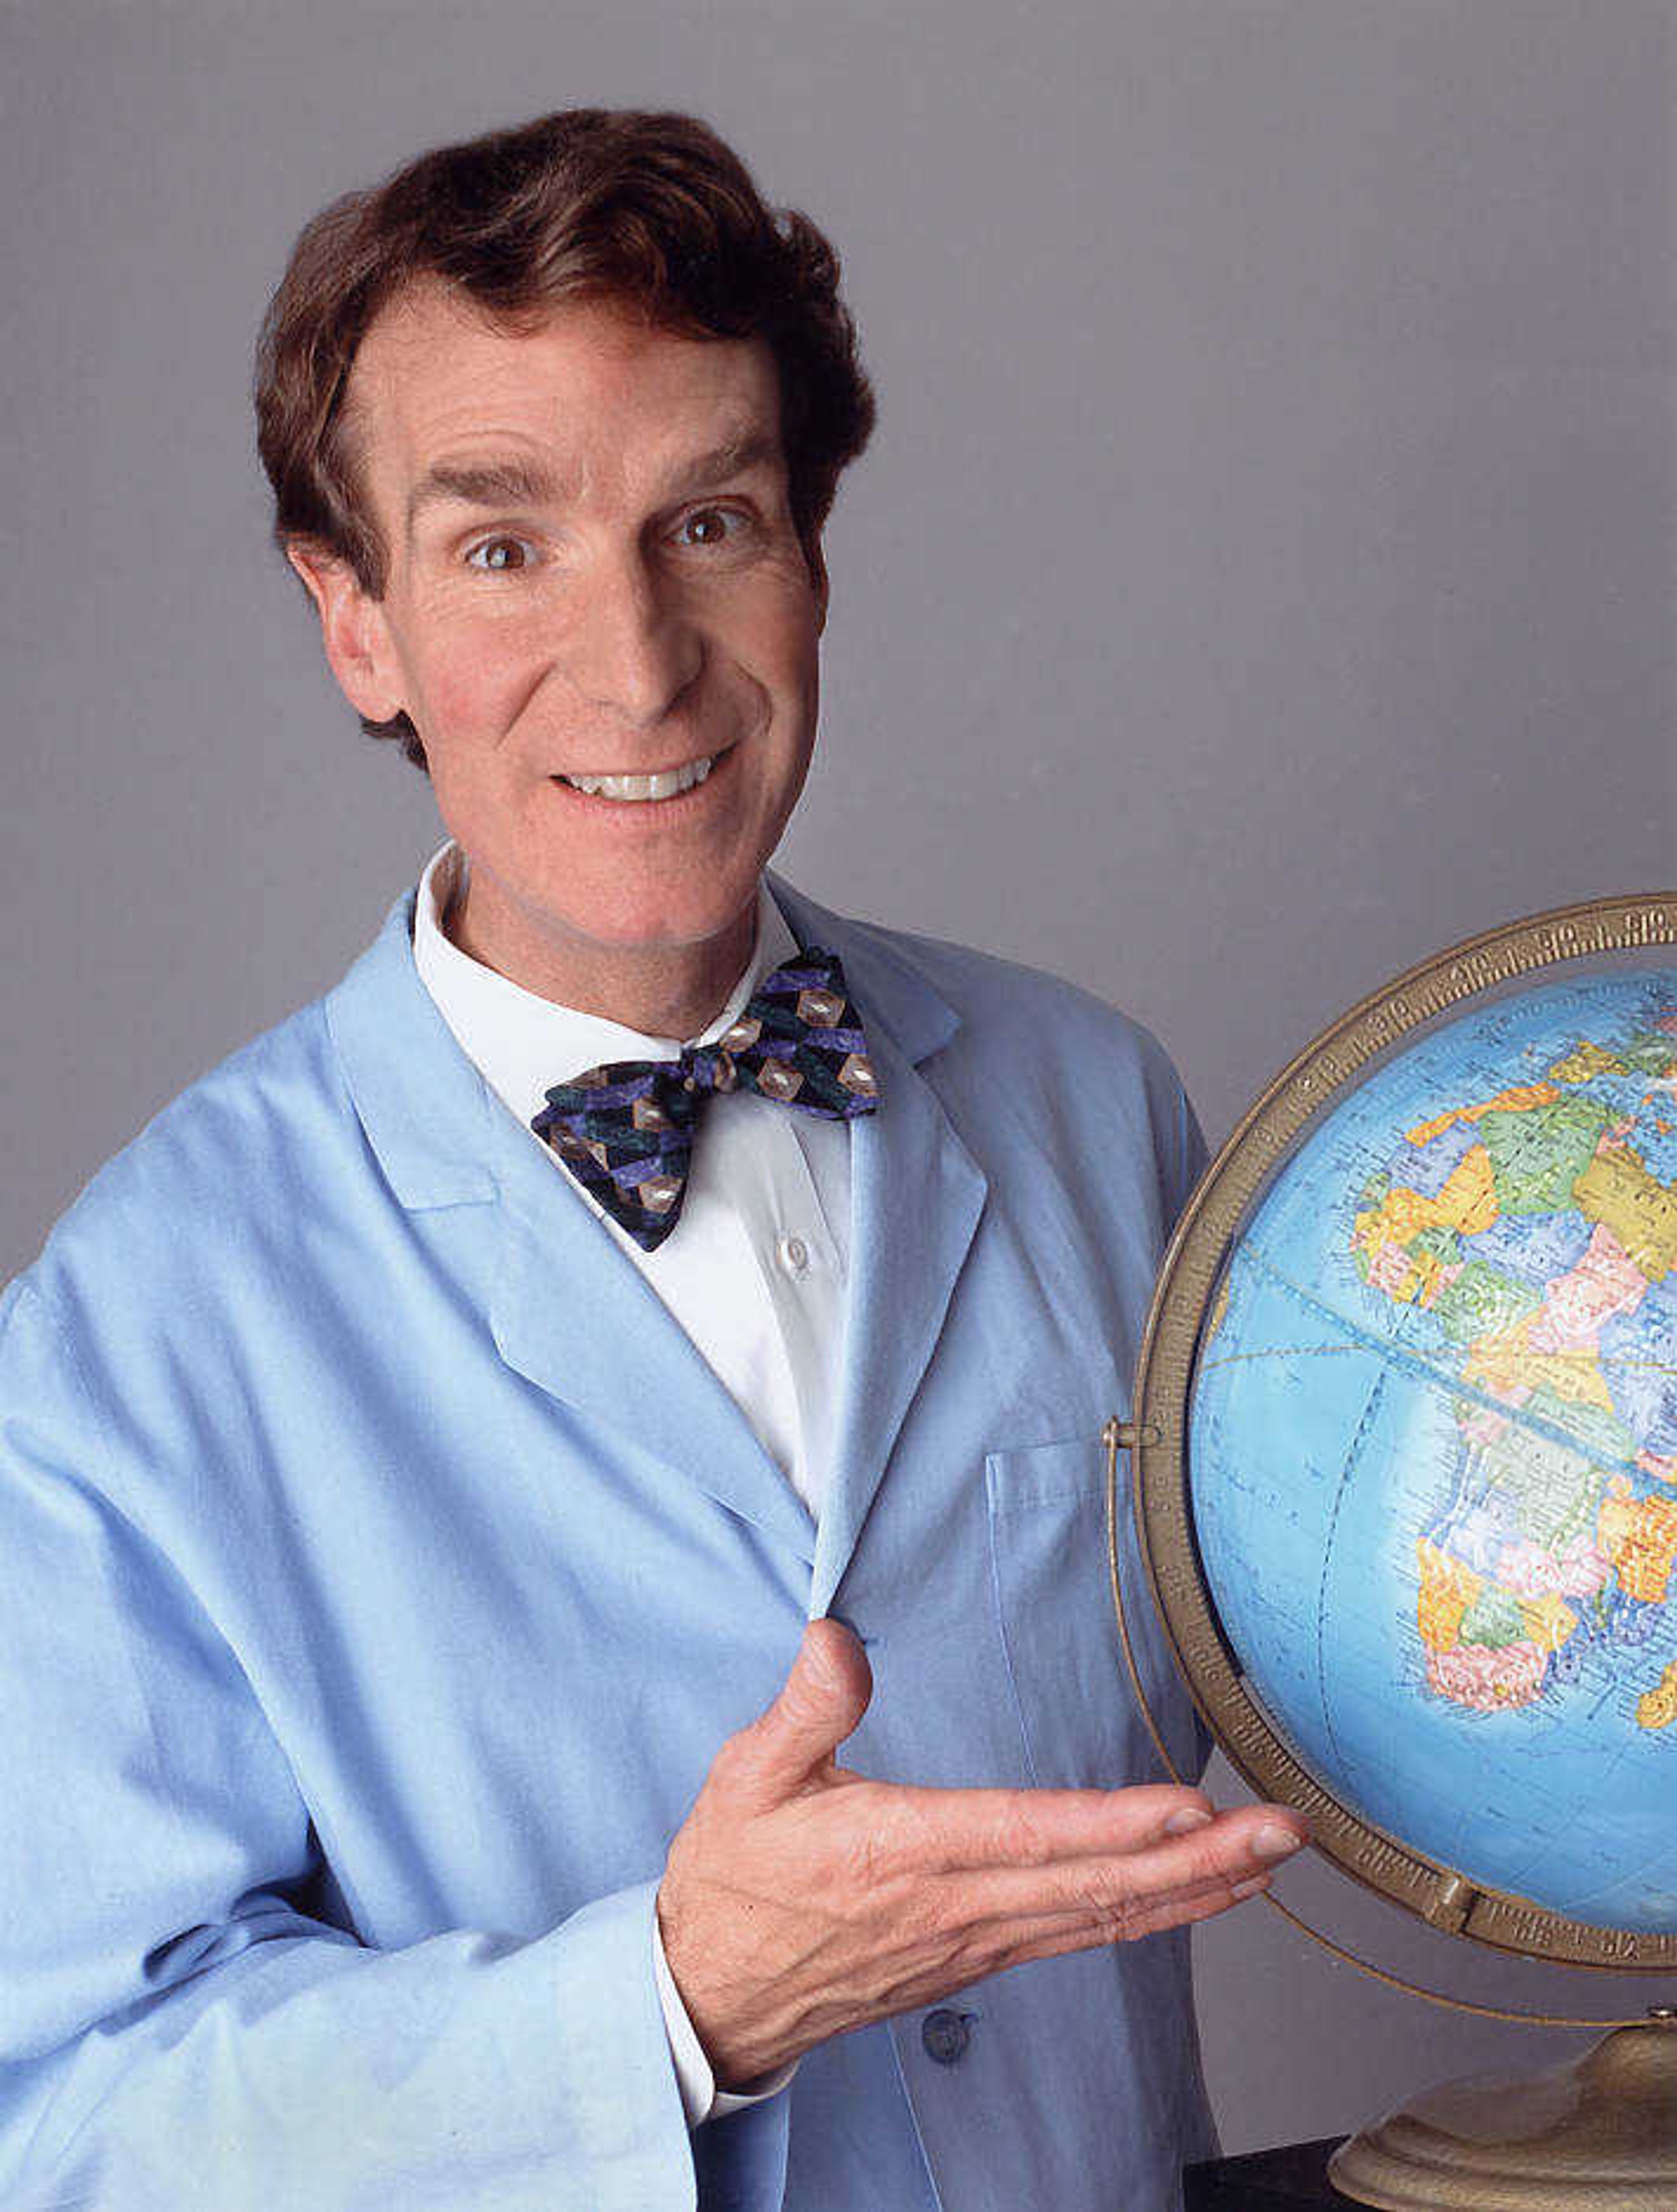 Bill Nye coming to Southeast as part of the speaker series